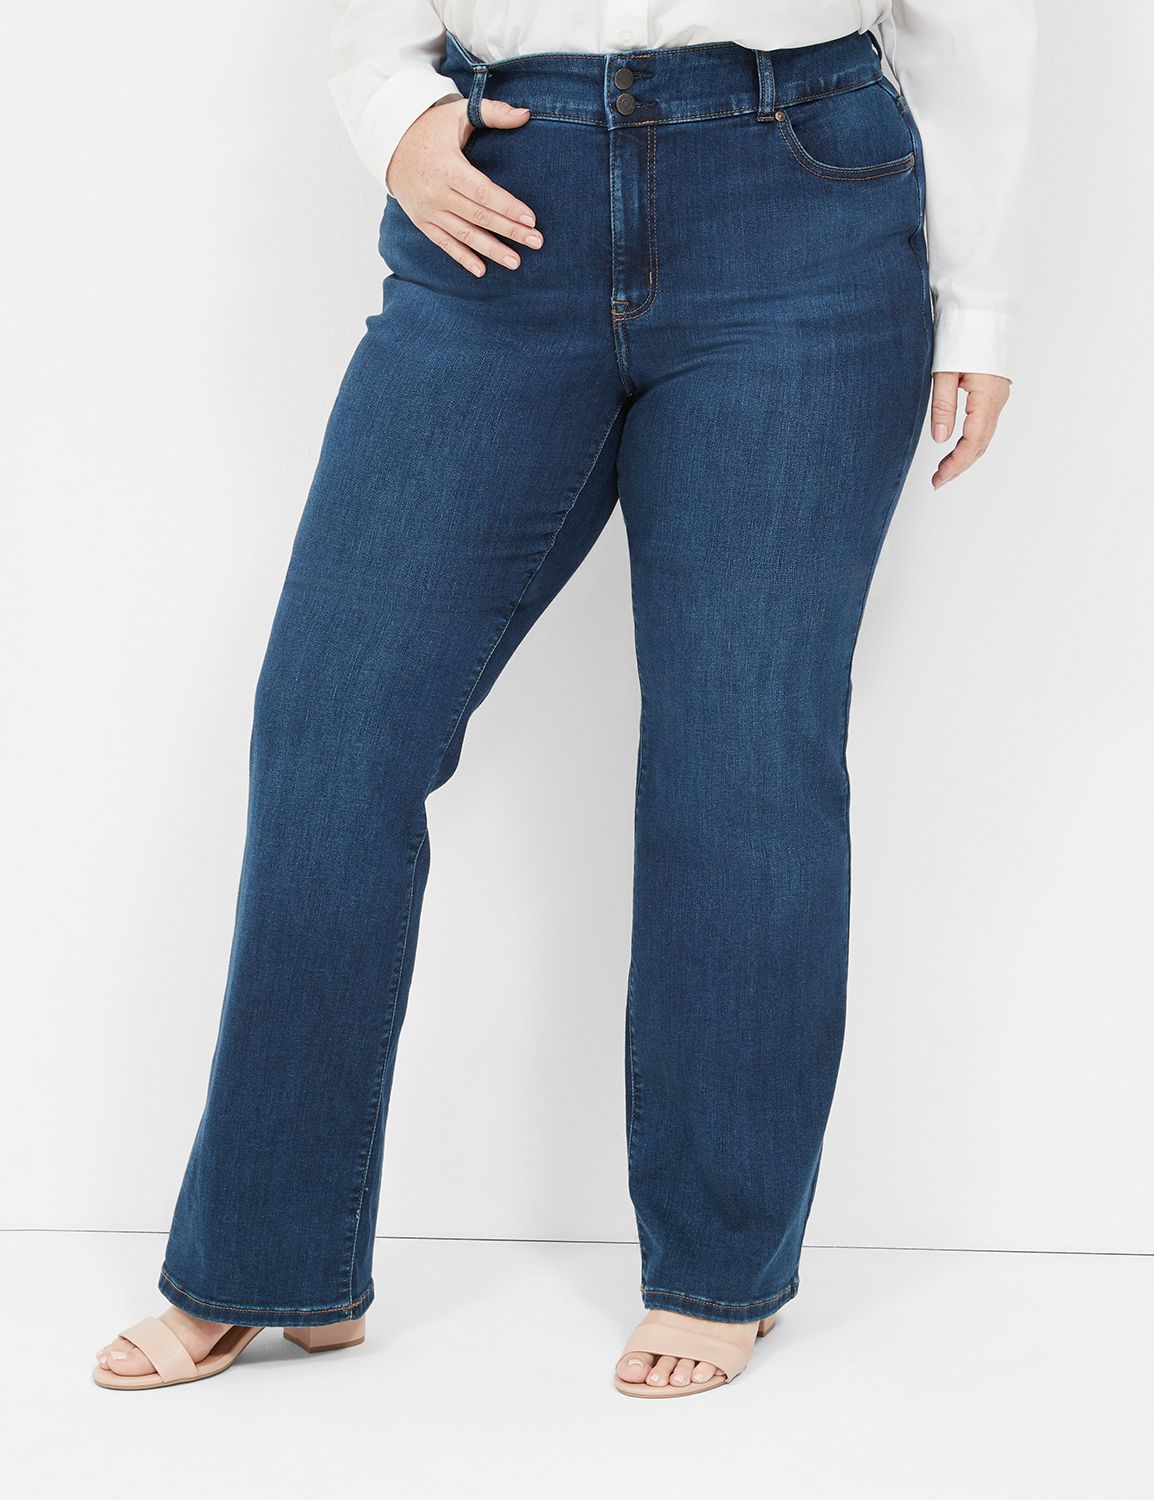 tummy support jeans